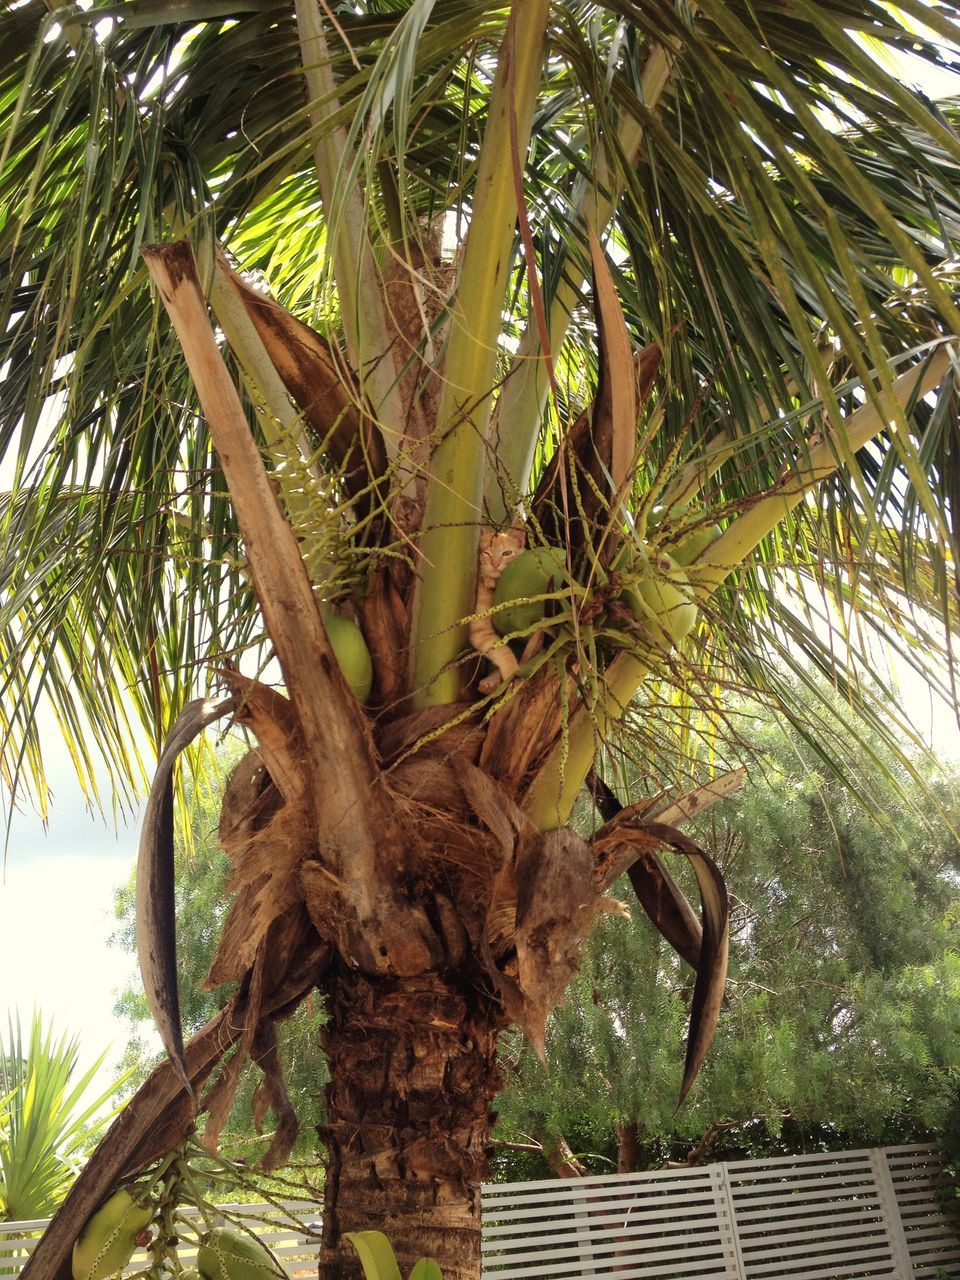 tree, palm tree, tree trunk, growth, branch, low angle view, palm leaf, leaf, nature, tranquility, green color, sunlight, beauty in nature, day, outdoors, no people, scenics, sky, wood - material, coconut palm tree